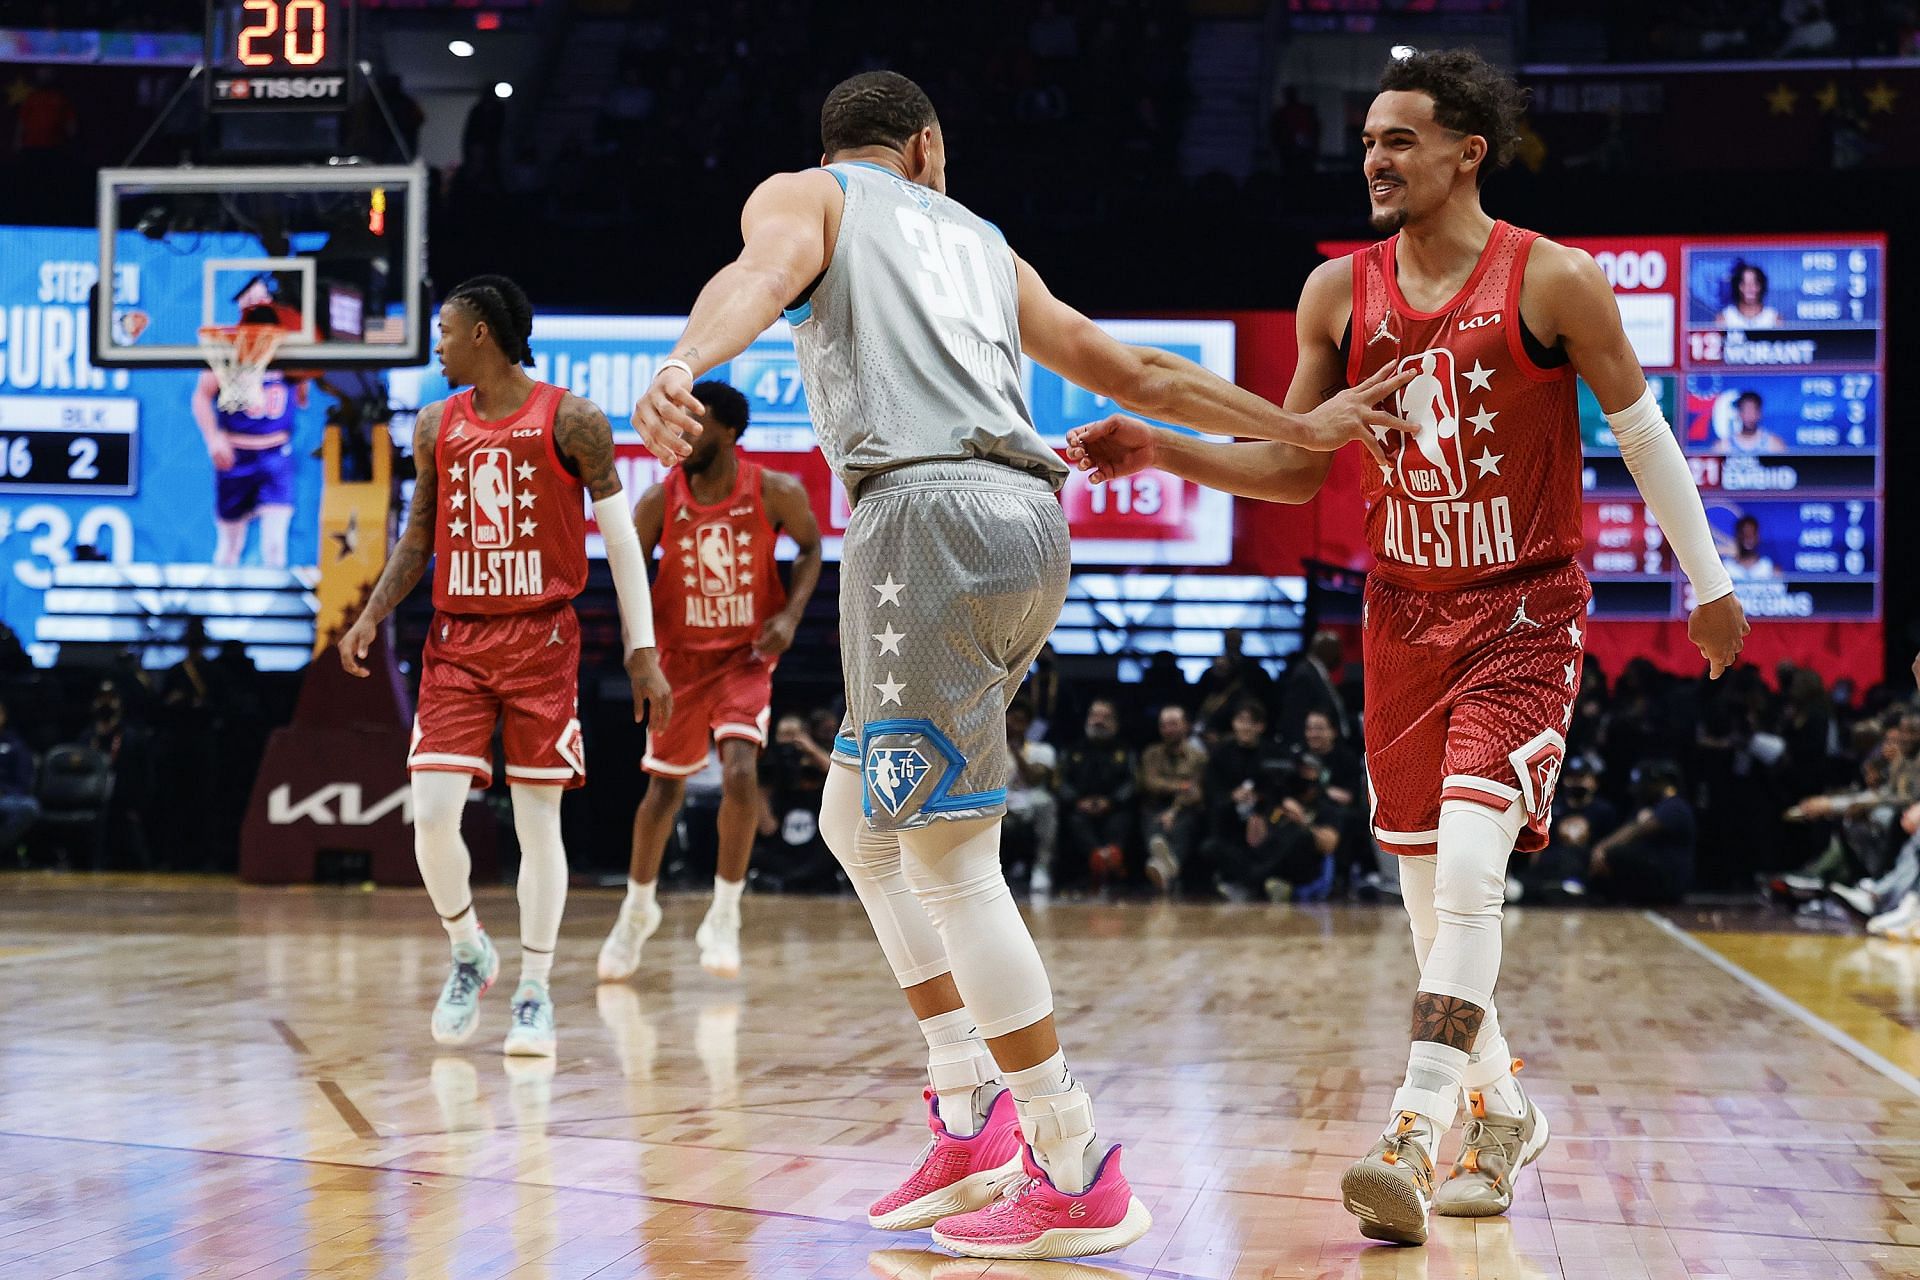 Stephen Curry and Trae Young at the 2022 NBA All-Star game. Both Curry and Young are considered to be elite long range shooters and ball-handlers in the NBA.